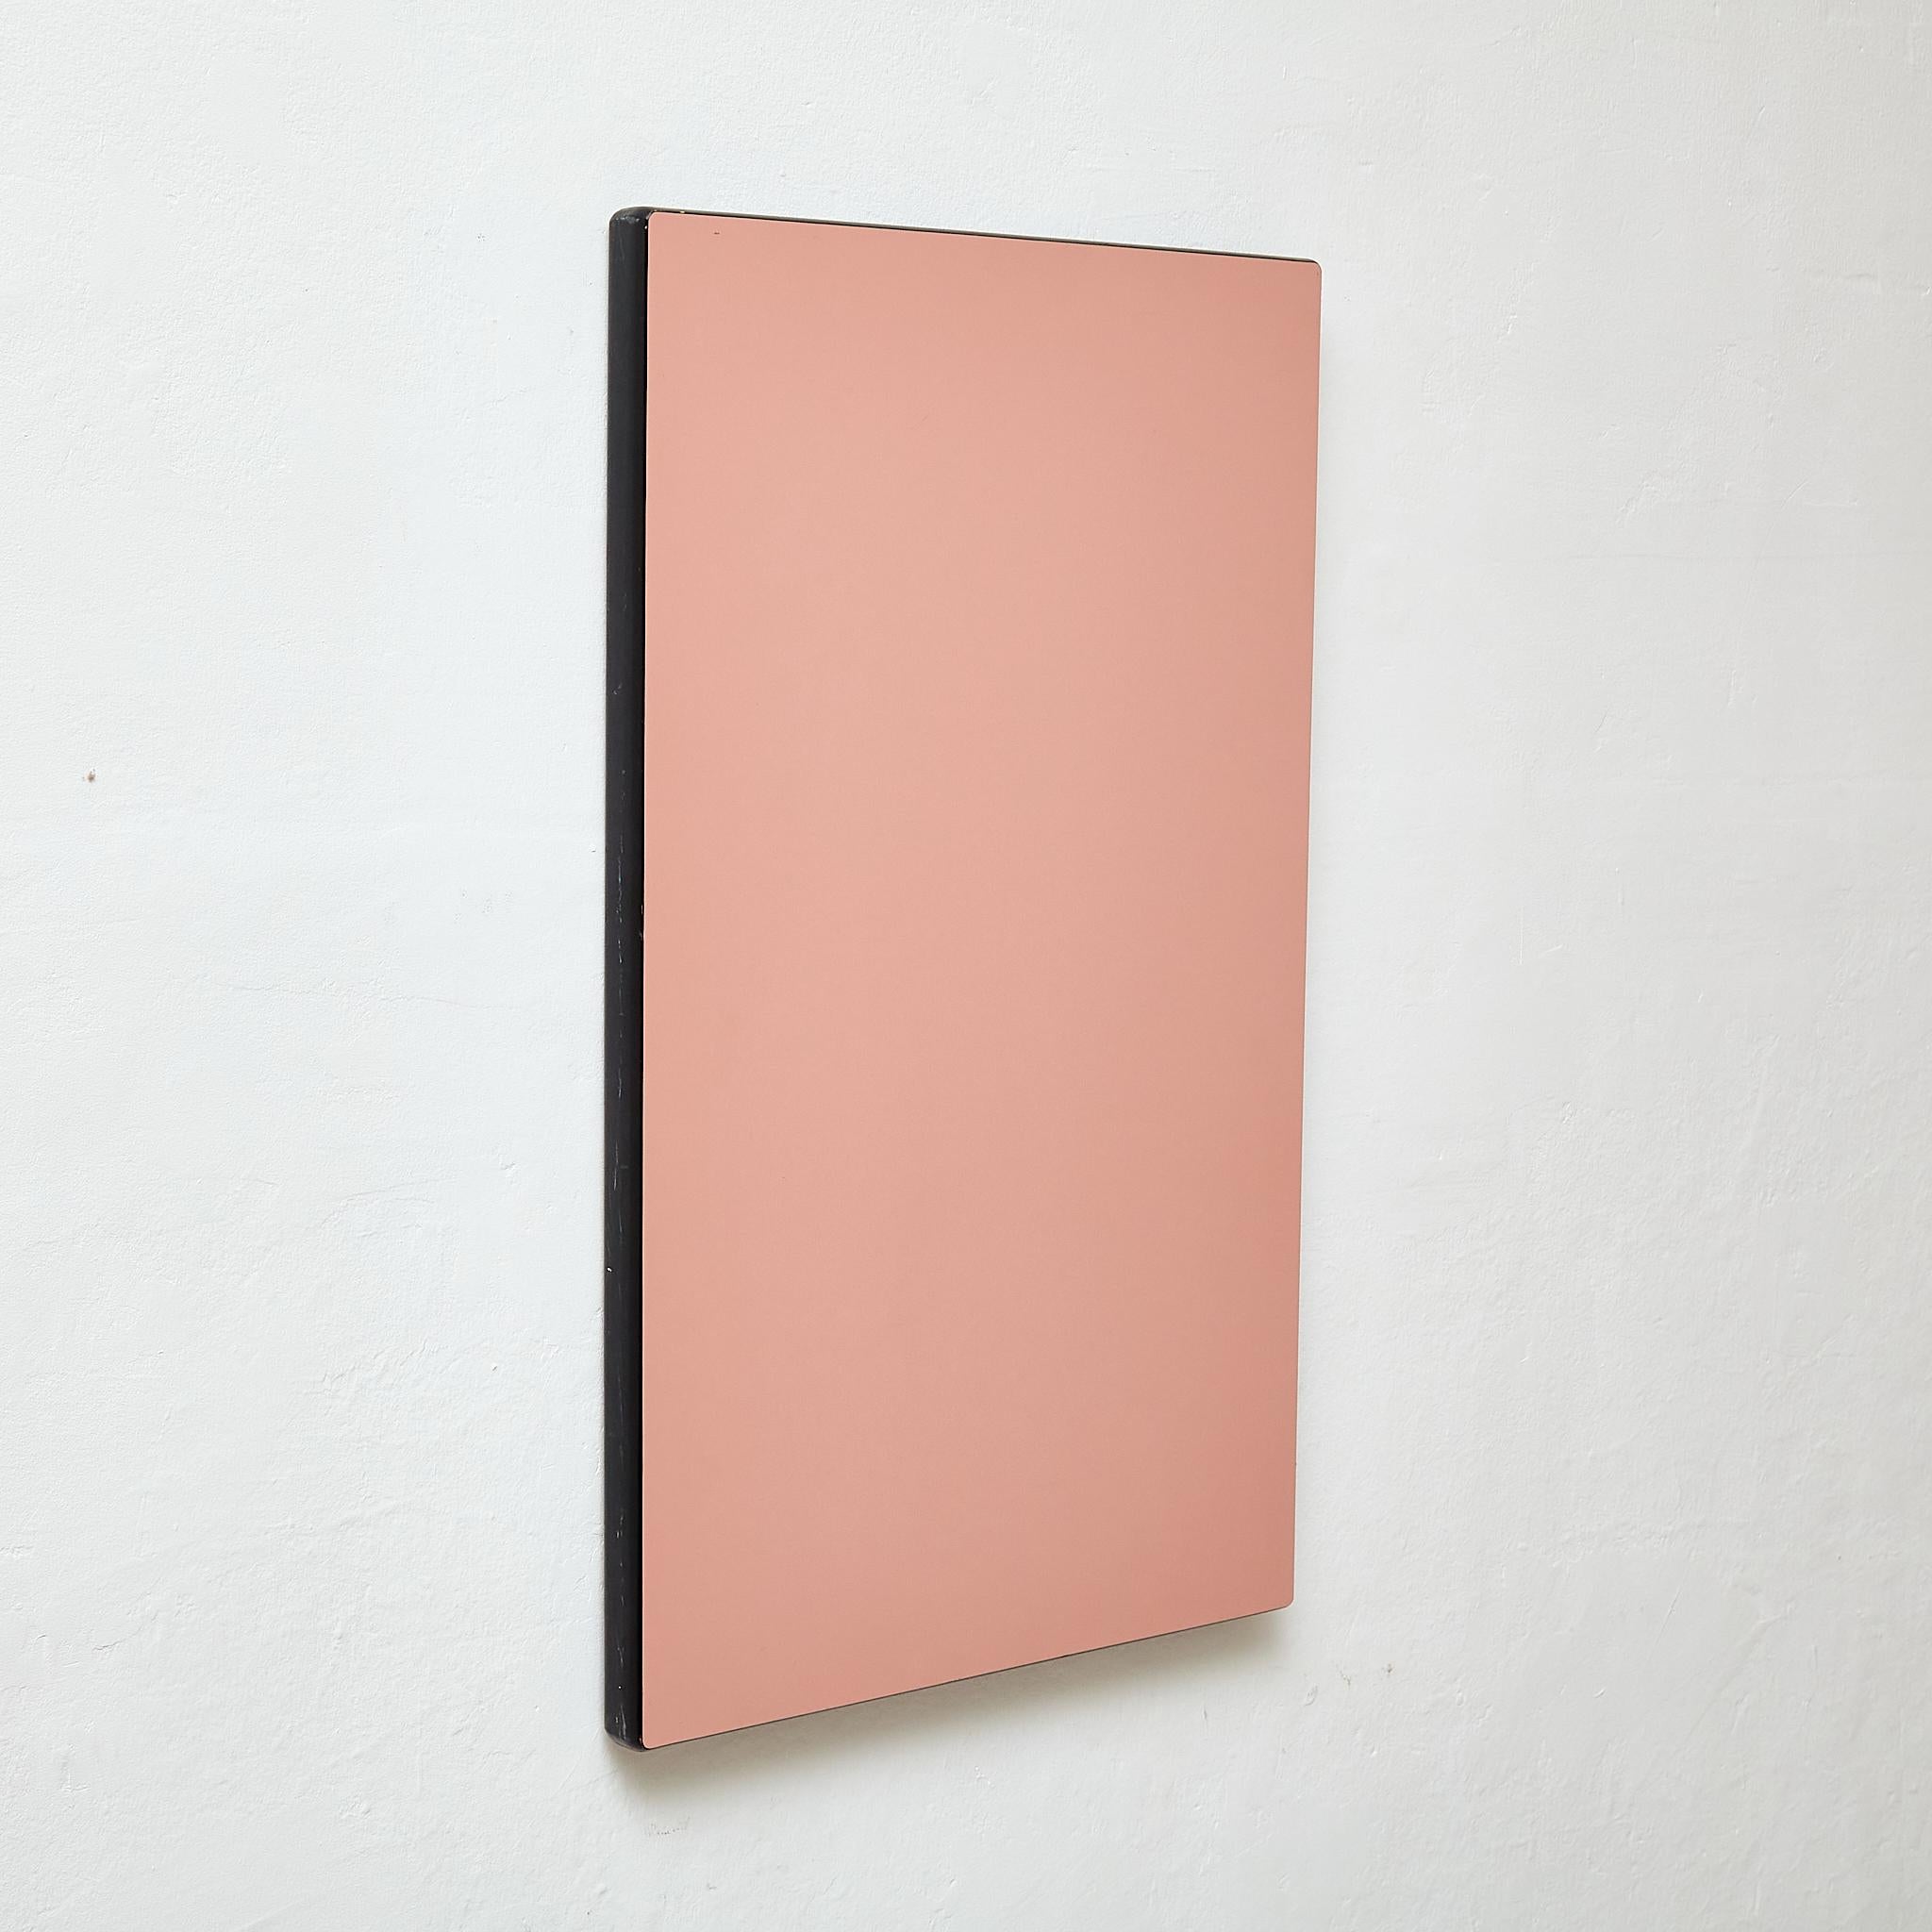 This contemporary artwork by Sandro is a stunning piece that showcases a beautiful pink monochrome color scheme. With its minimalist design, this artwork exudes a sense of simplicity and elegance. Crafted from wood, the artwork is in its original